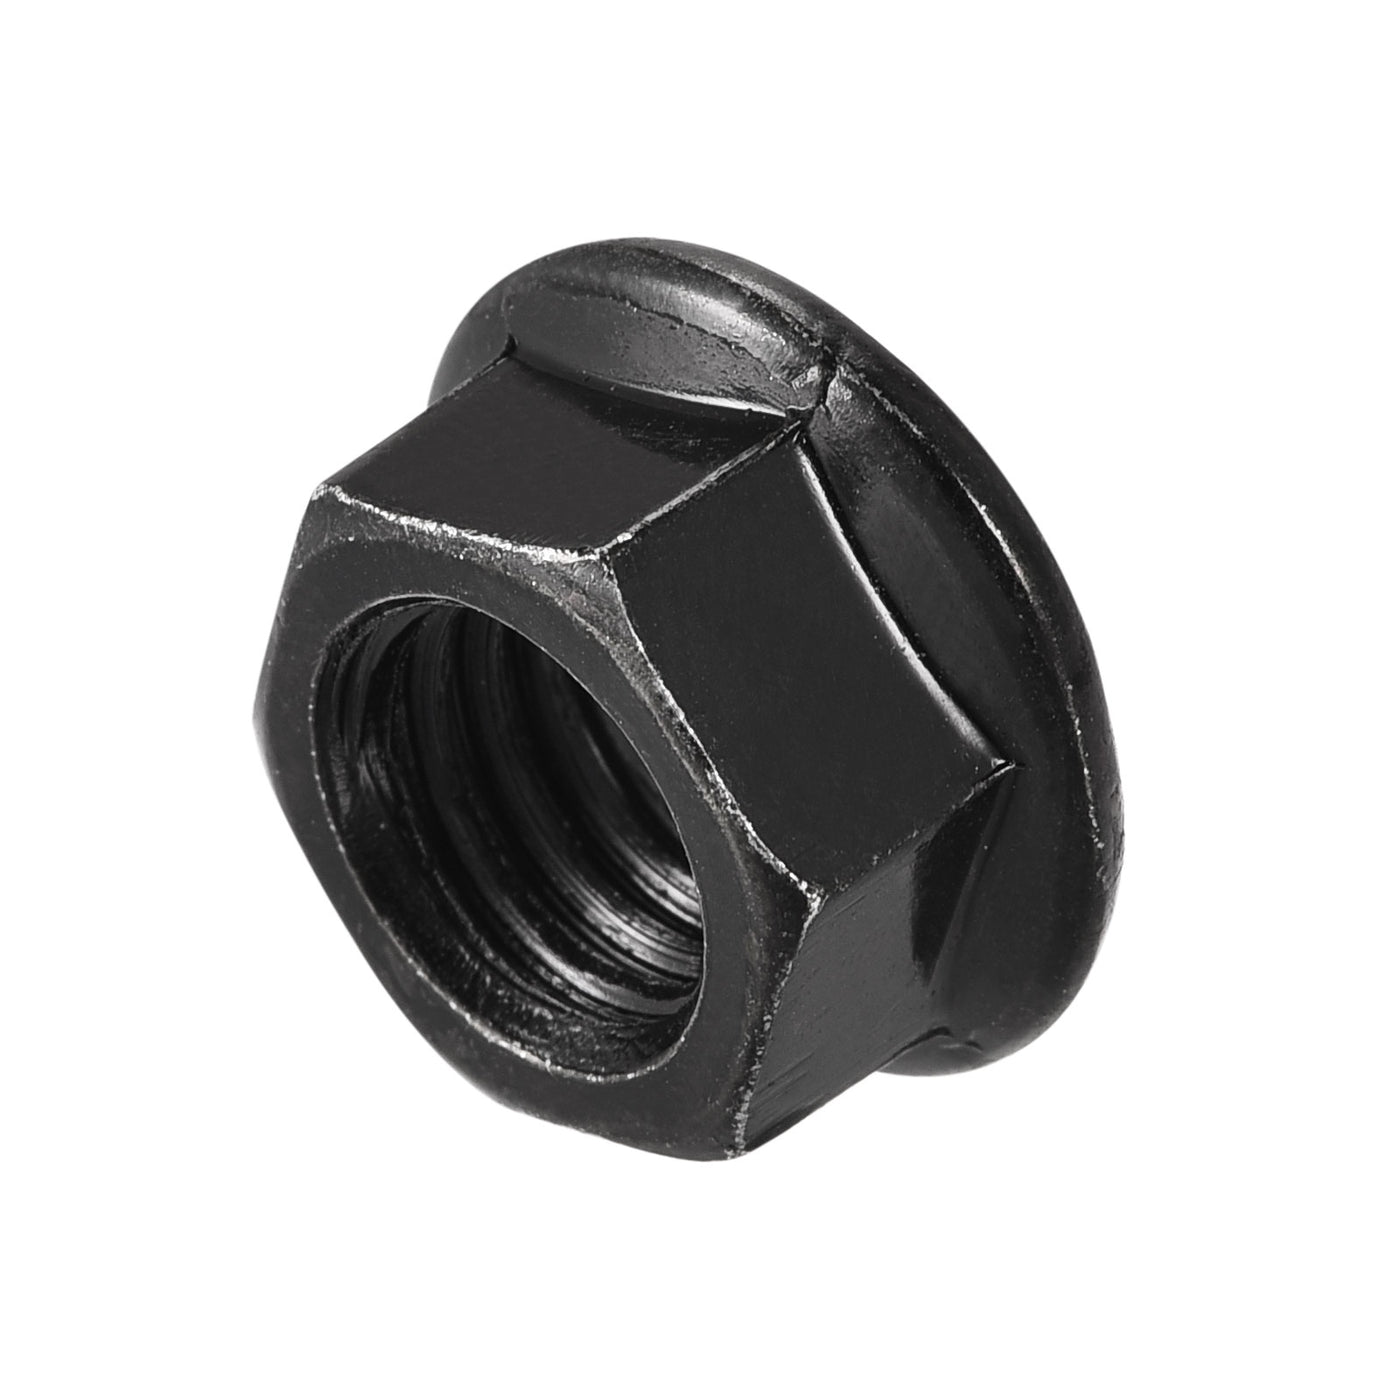 uxcell Uxcell Metric Serrated Flange Hex Lock Nuts, Carbon Steel Black Oxide Finished Self-locking